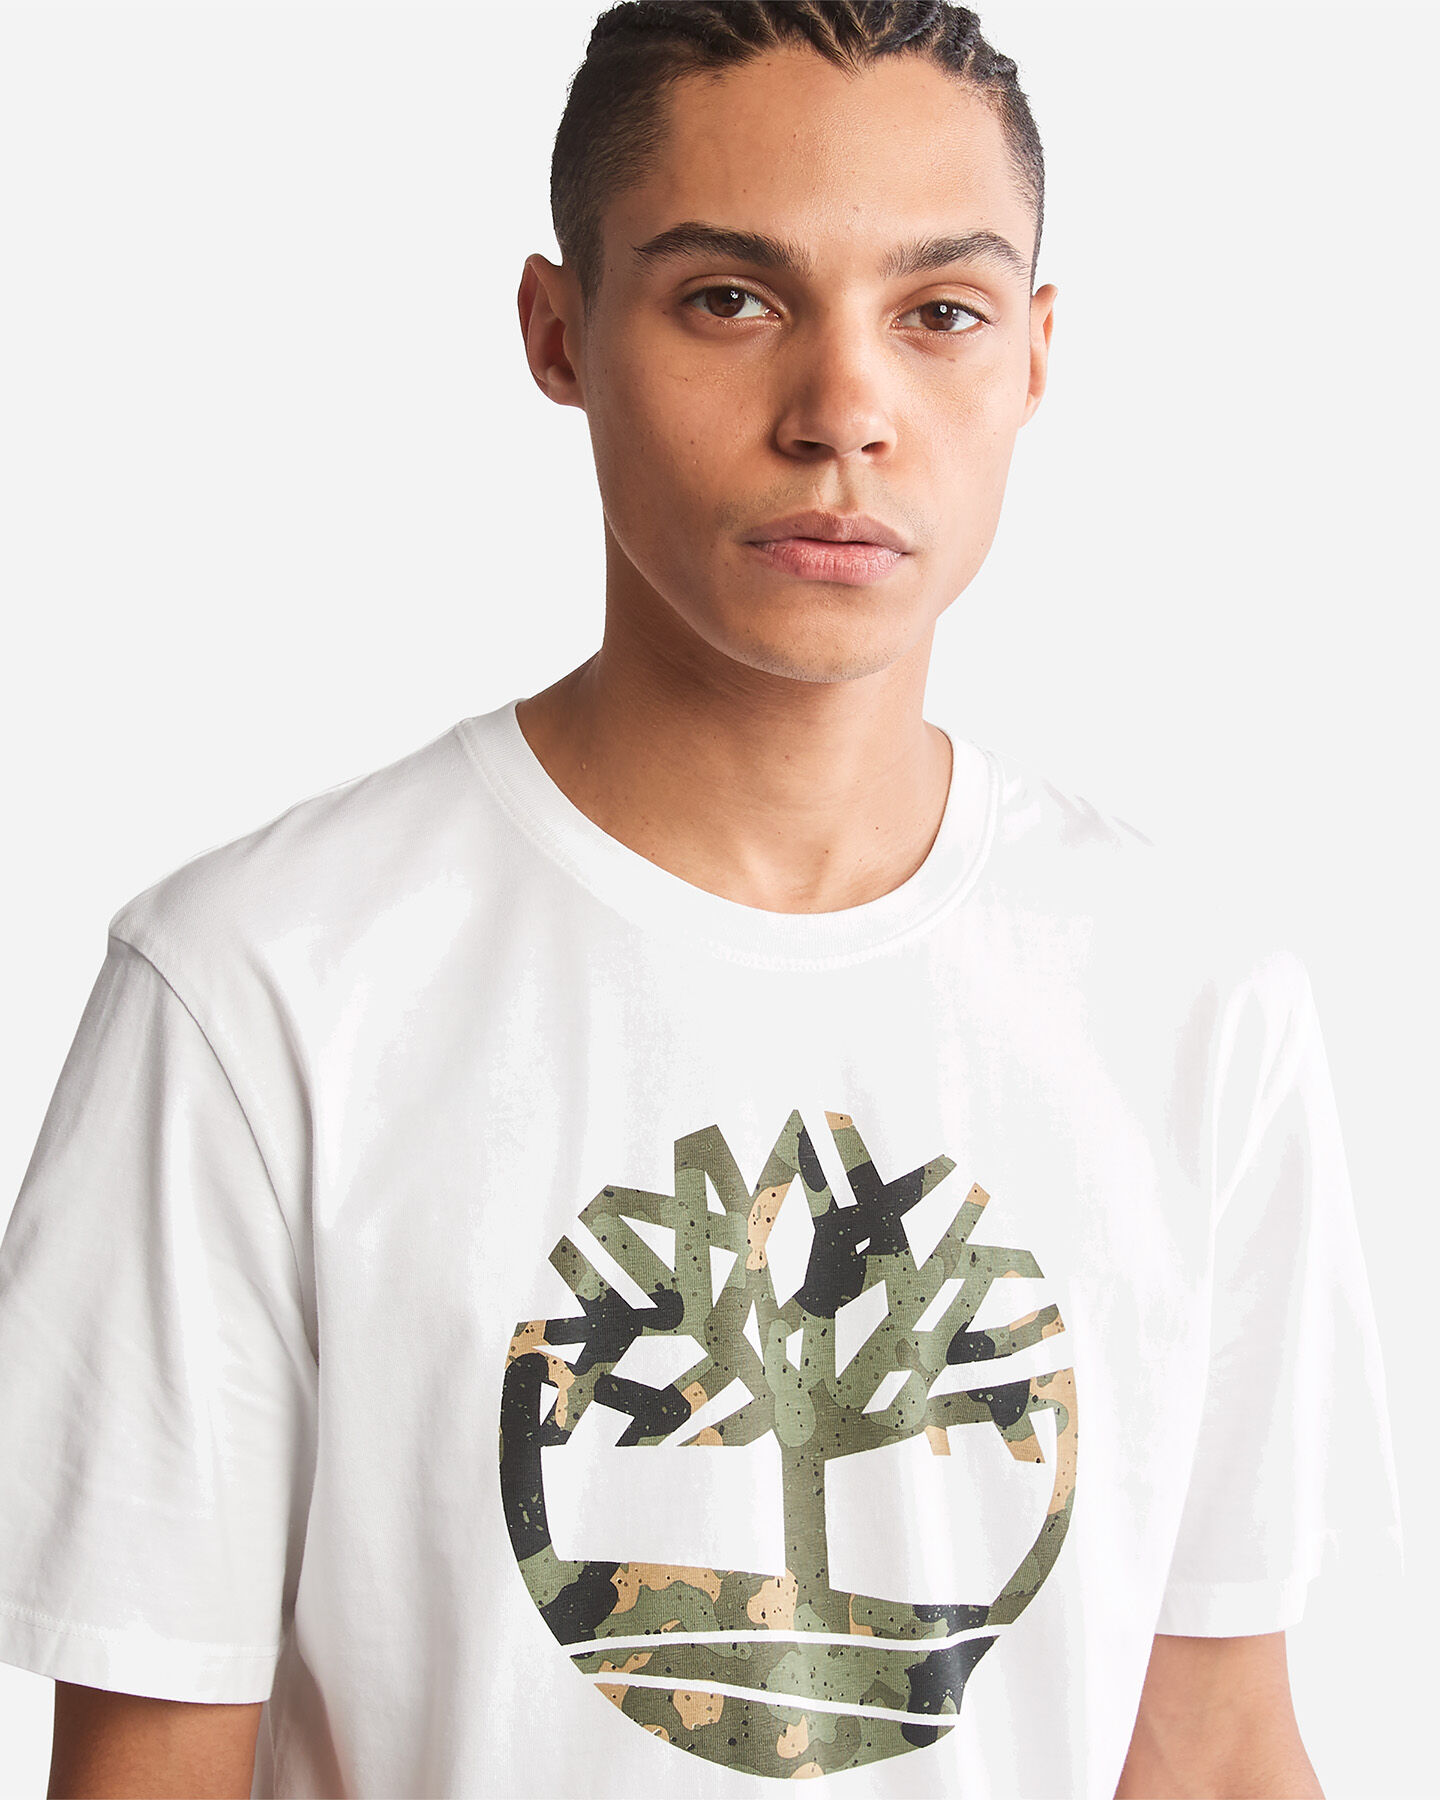  T-Shirt TIMBERLAND CAMO TREE T M S4104754|1001|S scatto 3